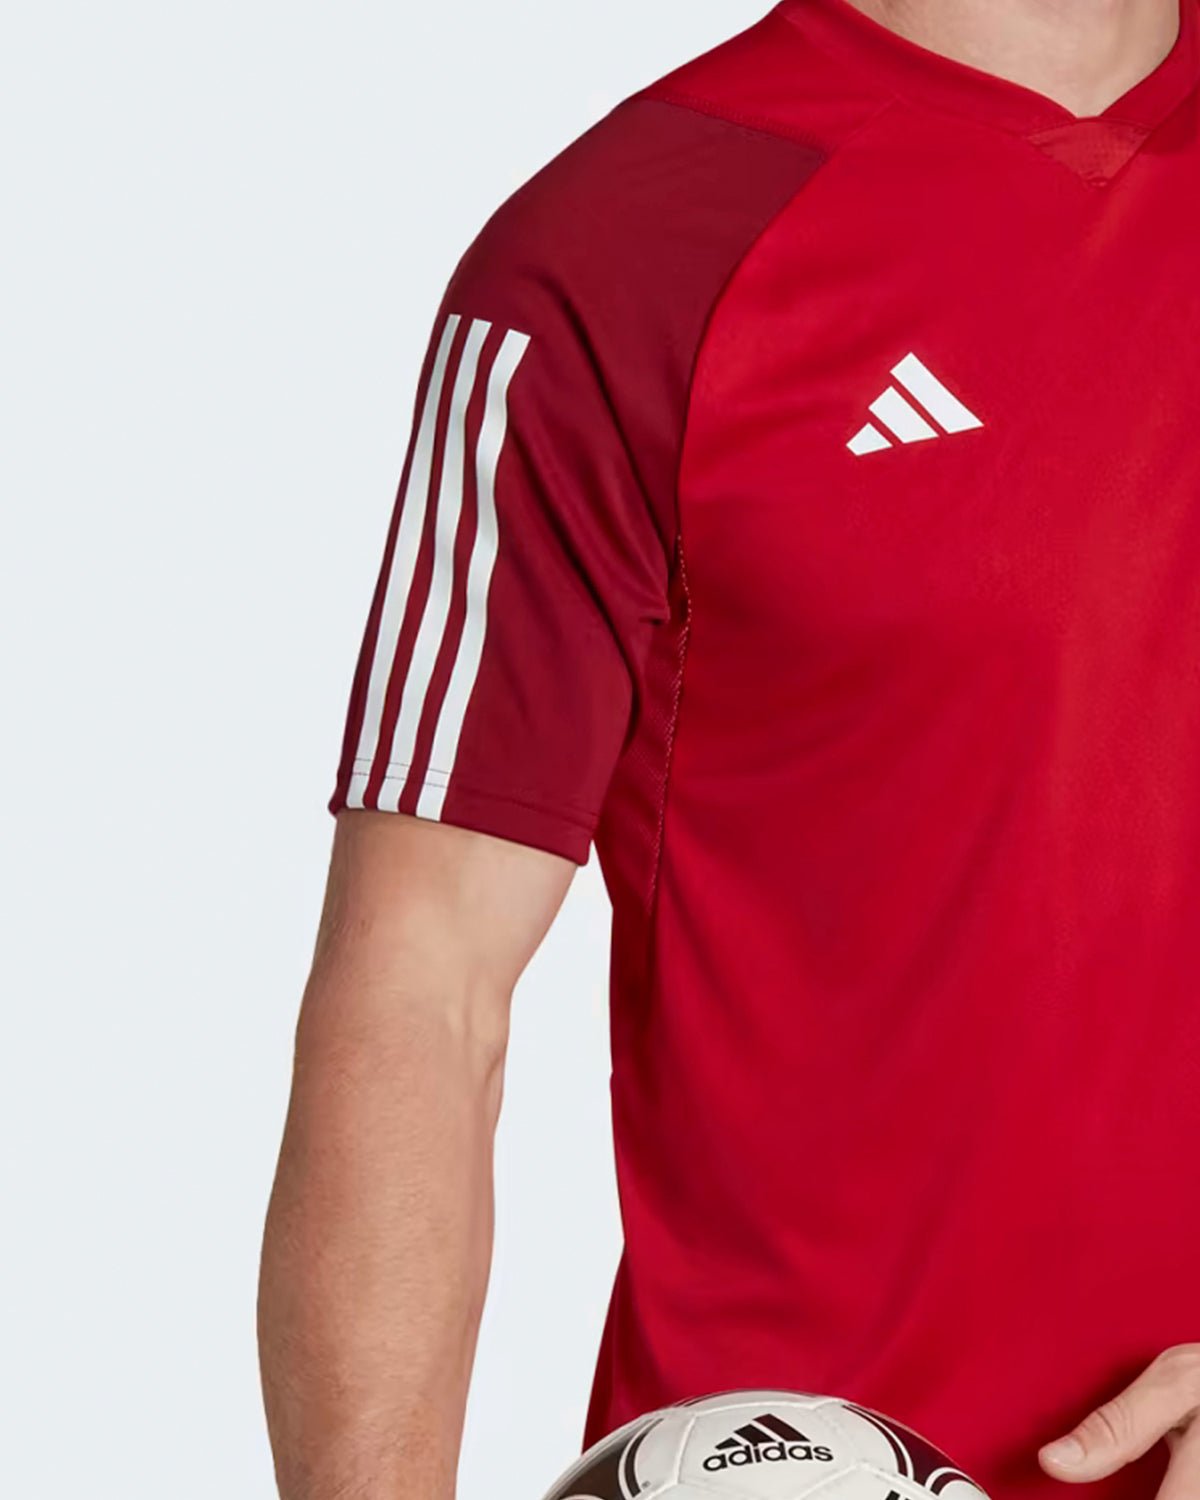 NFFC Red Training Jersey 23-24 - Nottingham Forest FC